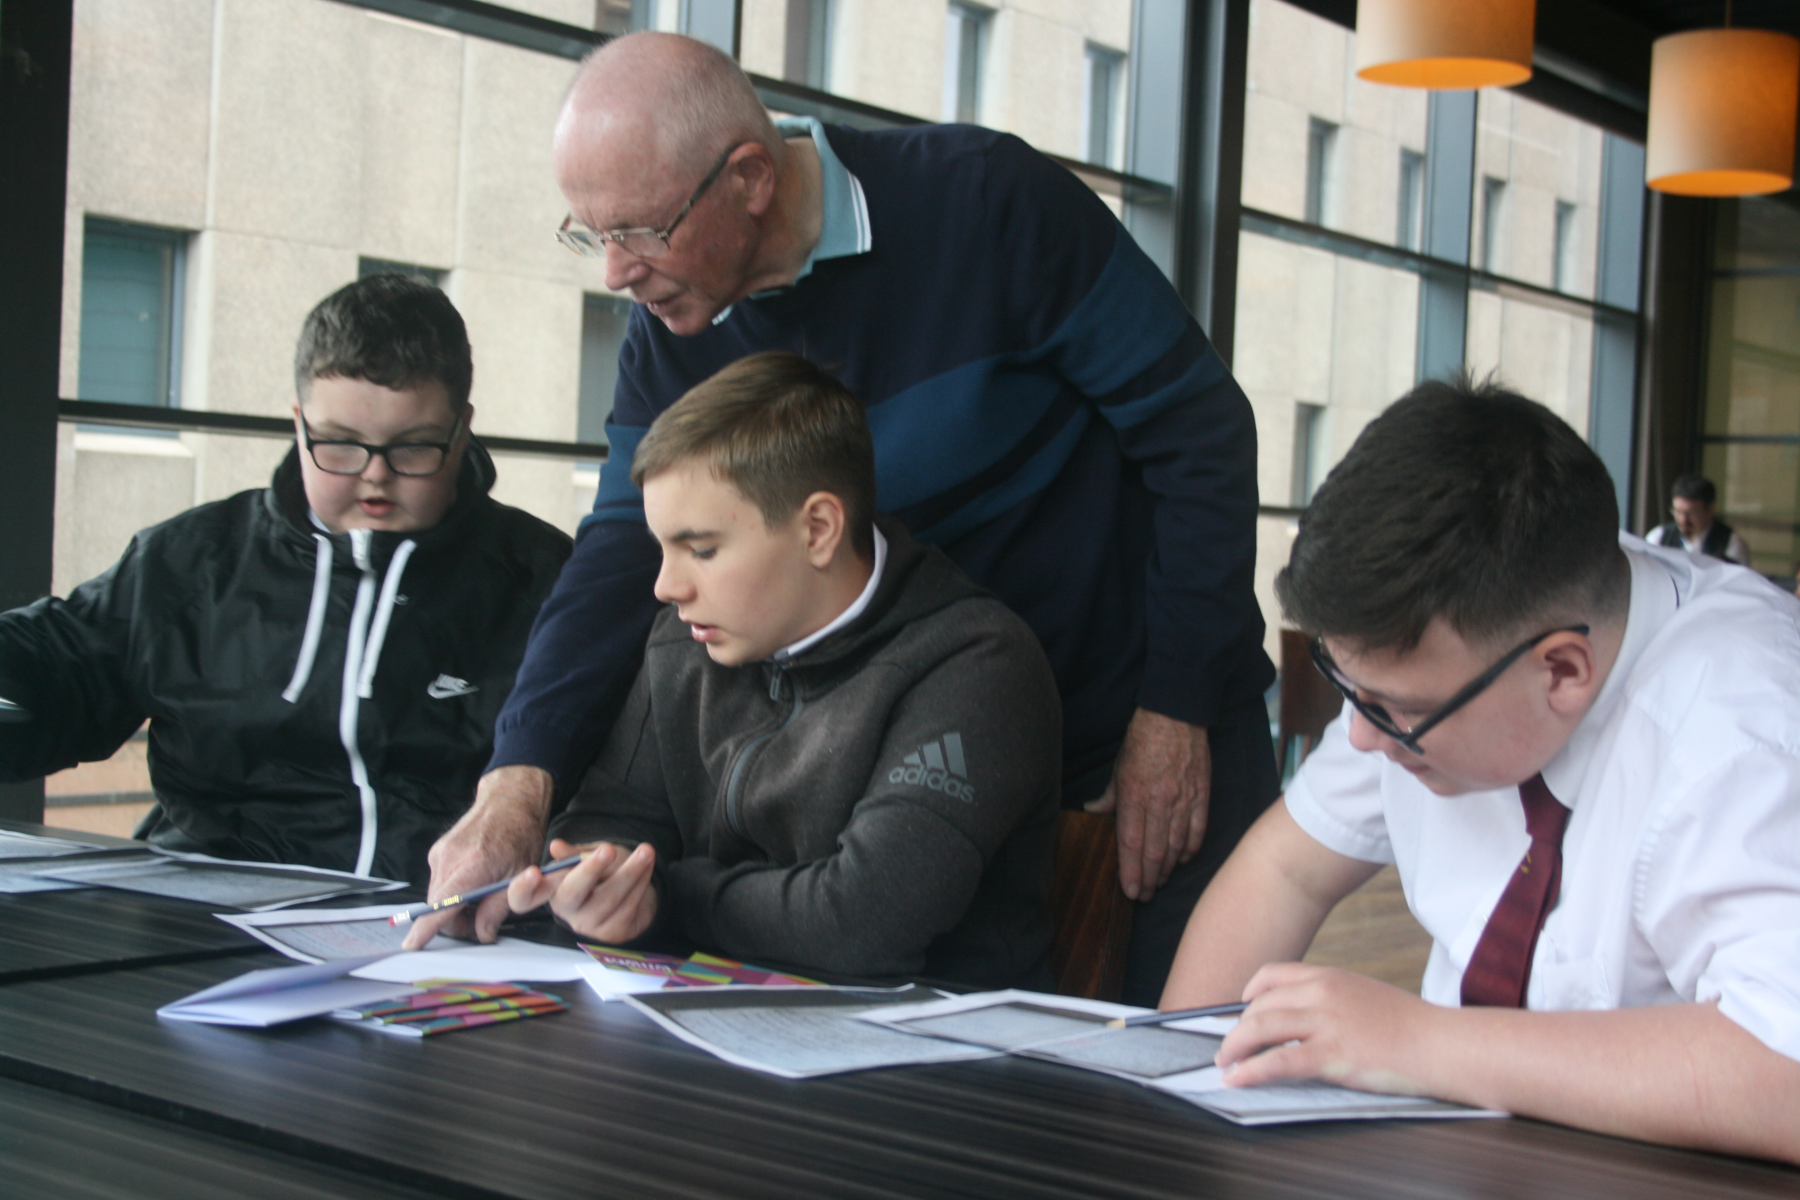 The image shows school pupils working at a desk with help from a lecturer.